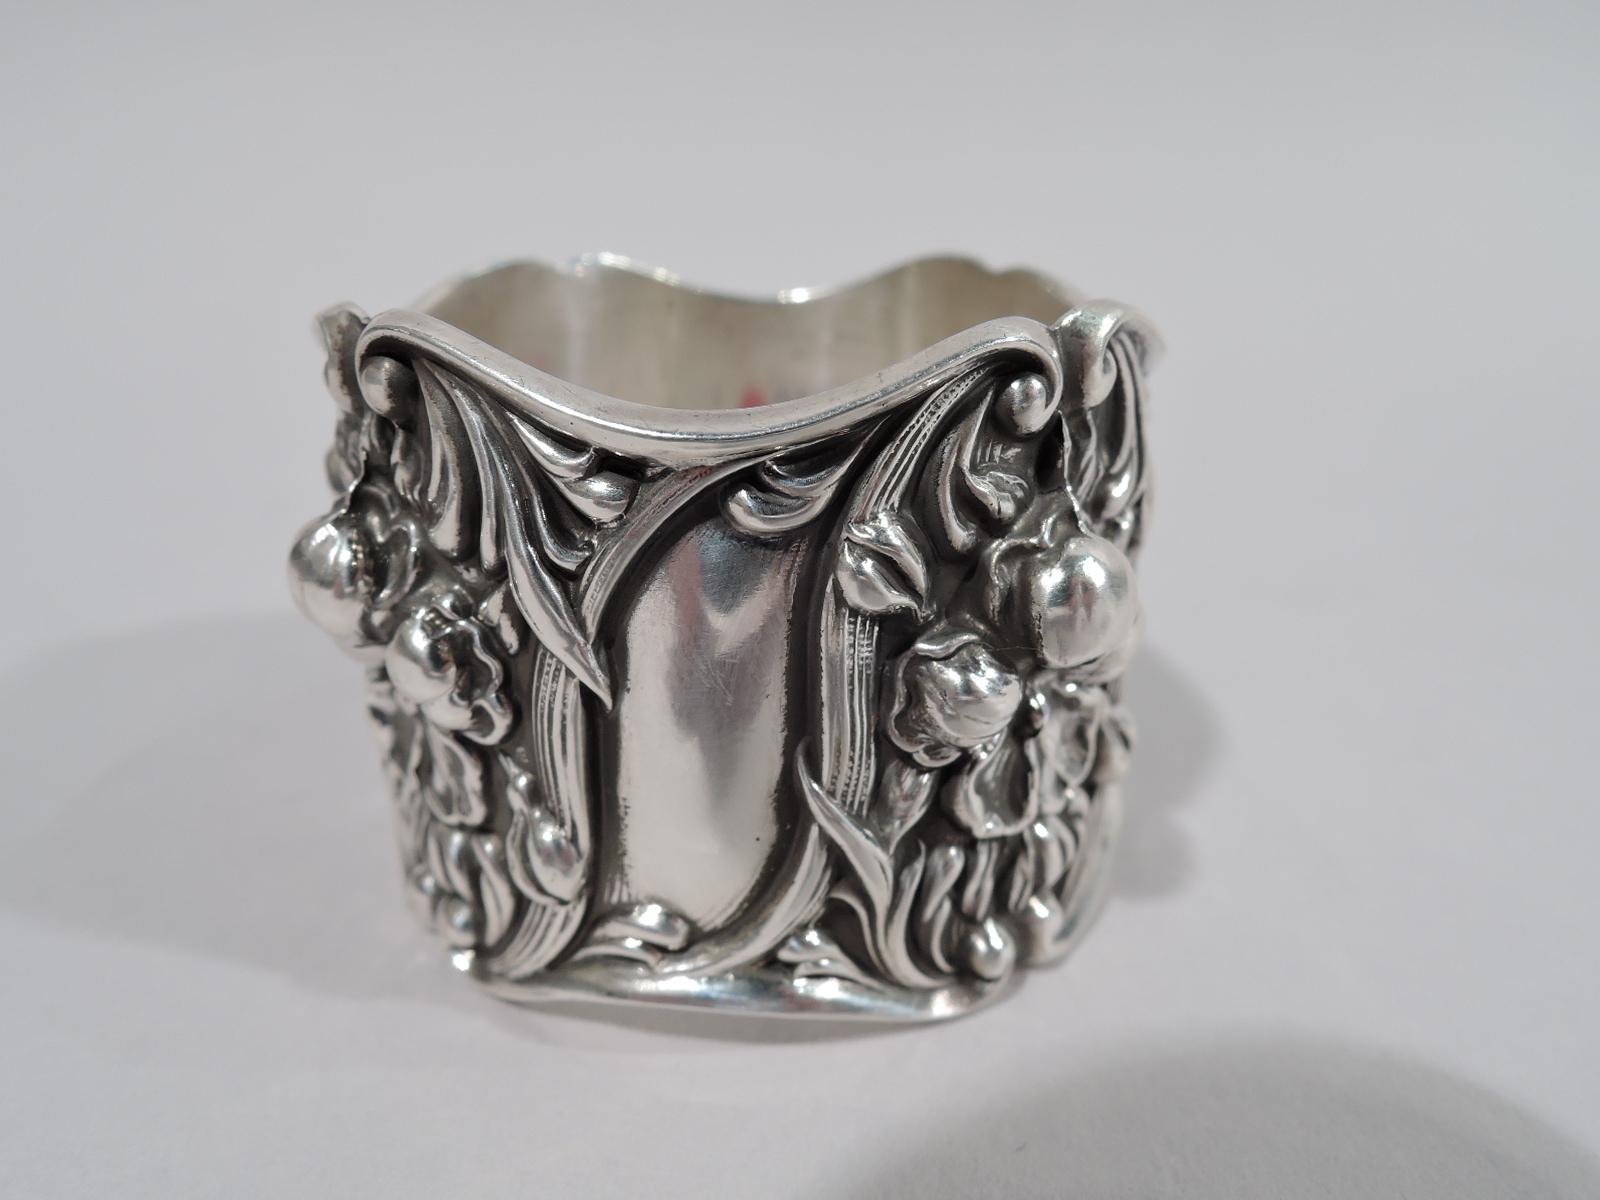 Turn of the century Art Nouveau sterling silver napkin ring. Wavy rims. Chased and tooled ornament with blossoms set in scrolled and reeded frames. Dense and textural with alternating vacant scrolls. Fully marked including Webster maker’s stamp.